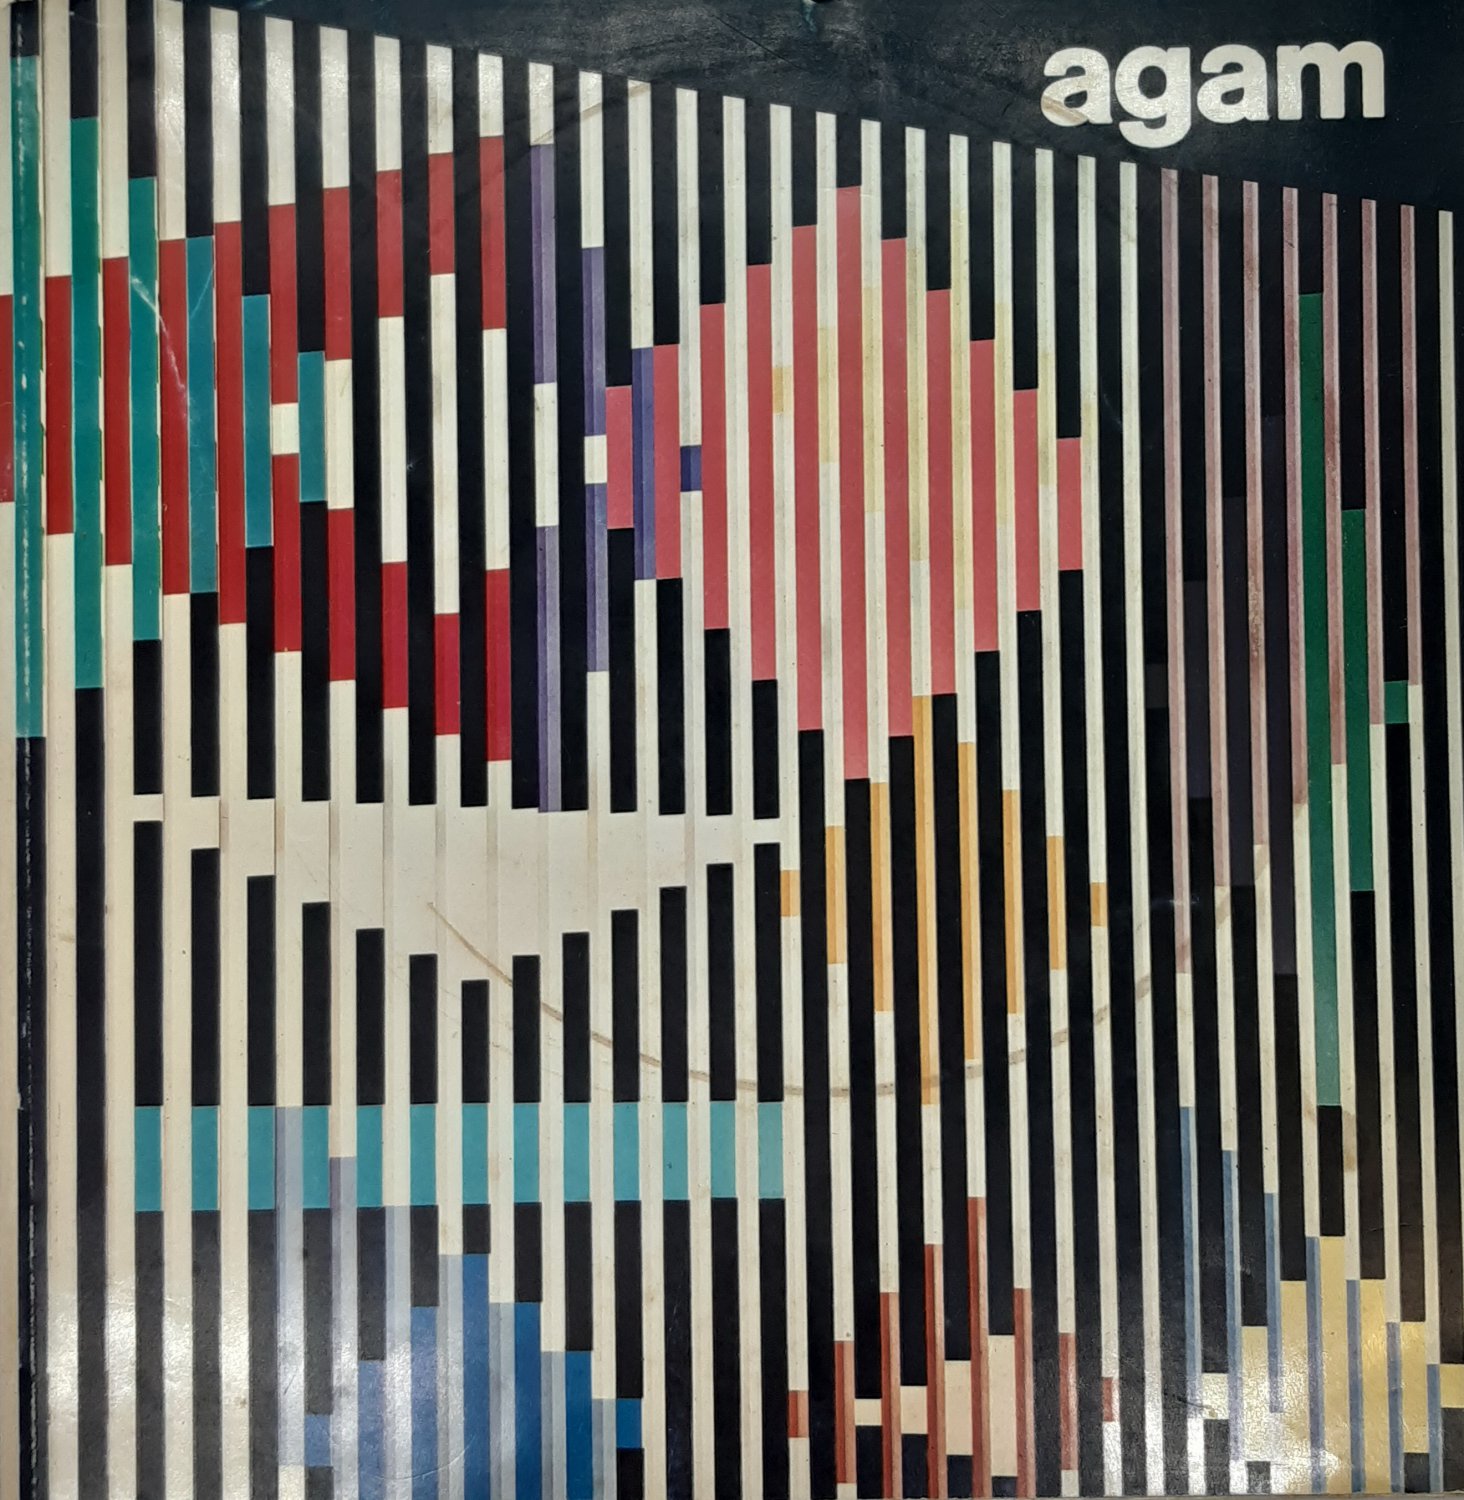 Yaakov Agam: Pictures â�� Sculptures. The Tel Aviv Museum, July -Aug. 1973, 1973, in Hebrew, English